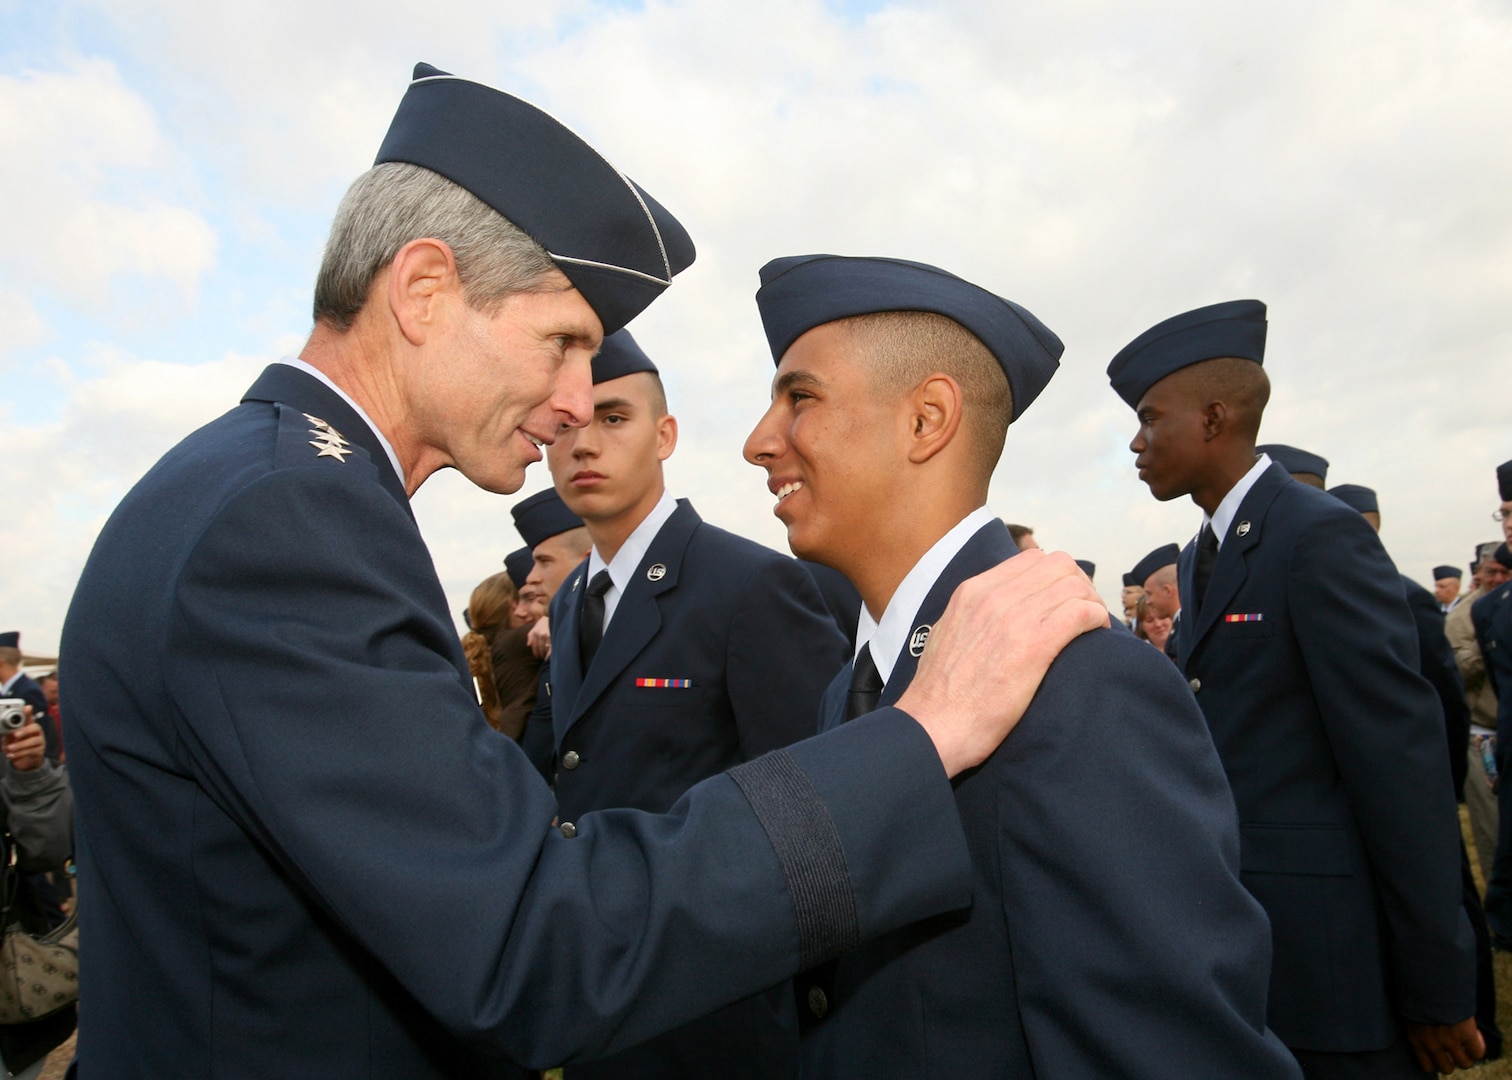 Air Force Chief of Staff Gen. Norton Schwartz congratulates Airman Yancy Nunez on his graduation from basic military training Oct. 31 at Lackland Air Force Base, Texas. While on base, General Schwartz administered the Oath of Enlistment to basic training graduates and served as the reviewing official for the BMT parade. Airman Nunez is from the 322nd Training Squadron, Flight 673. (U.S. Air Force photo/Robbin Cresswell)  